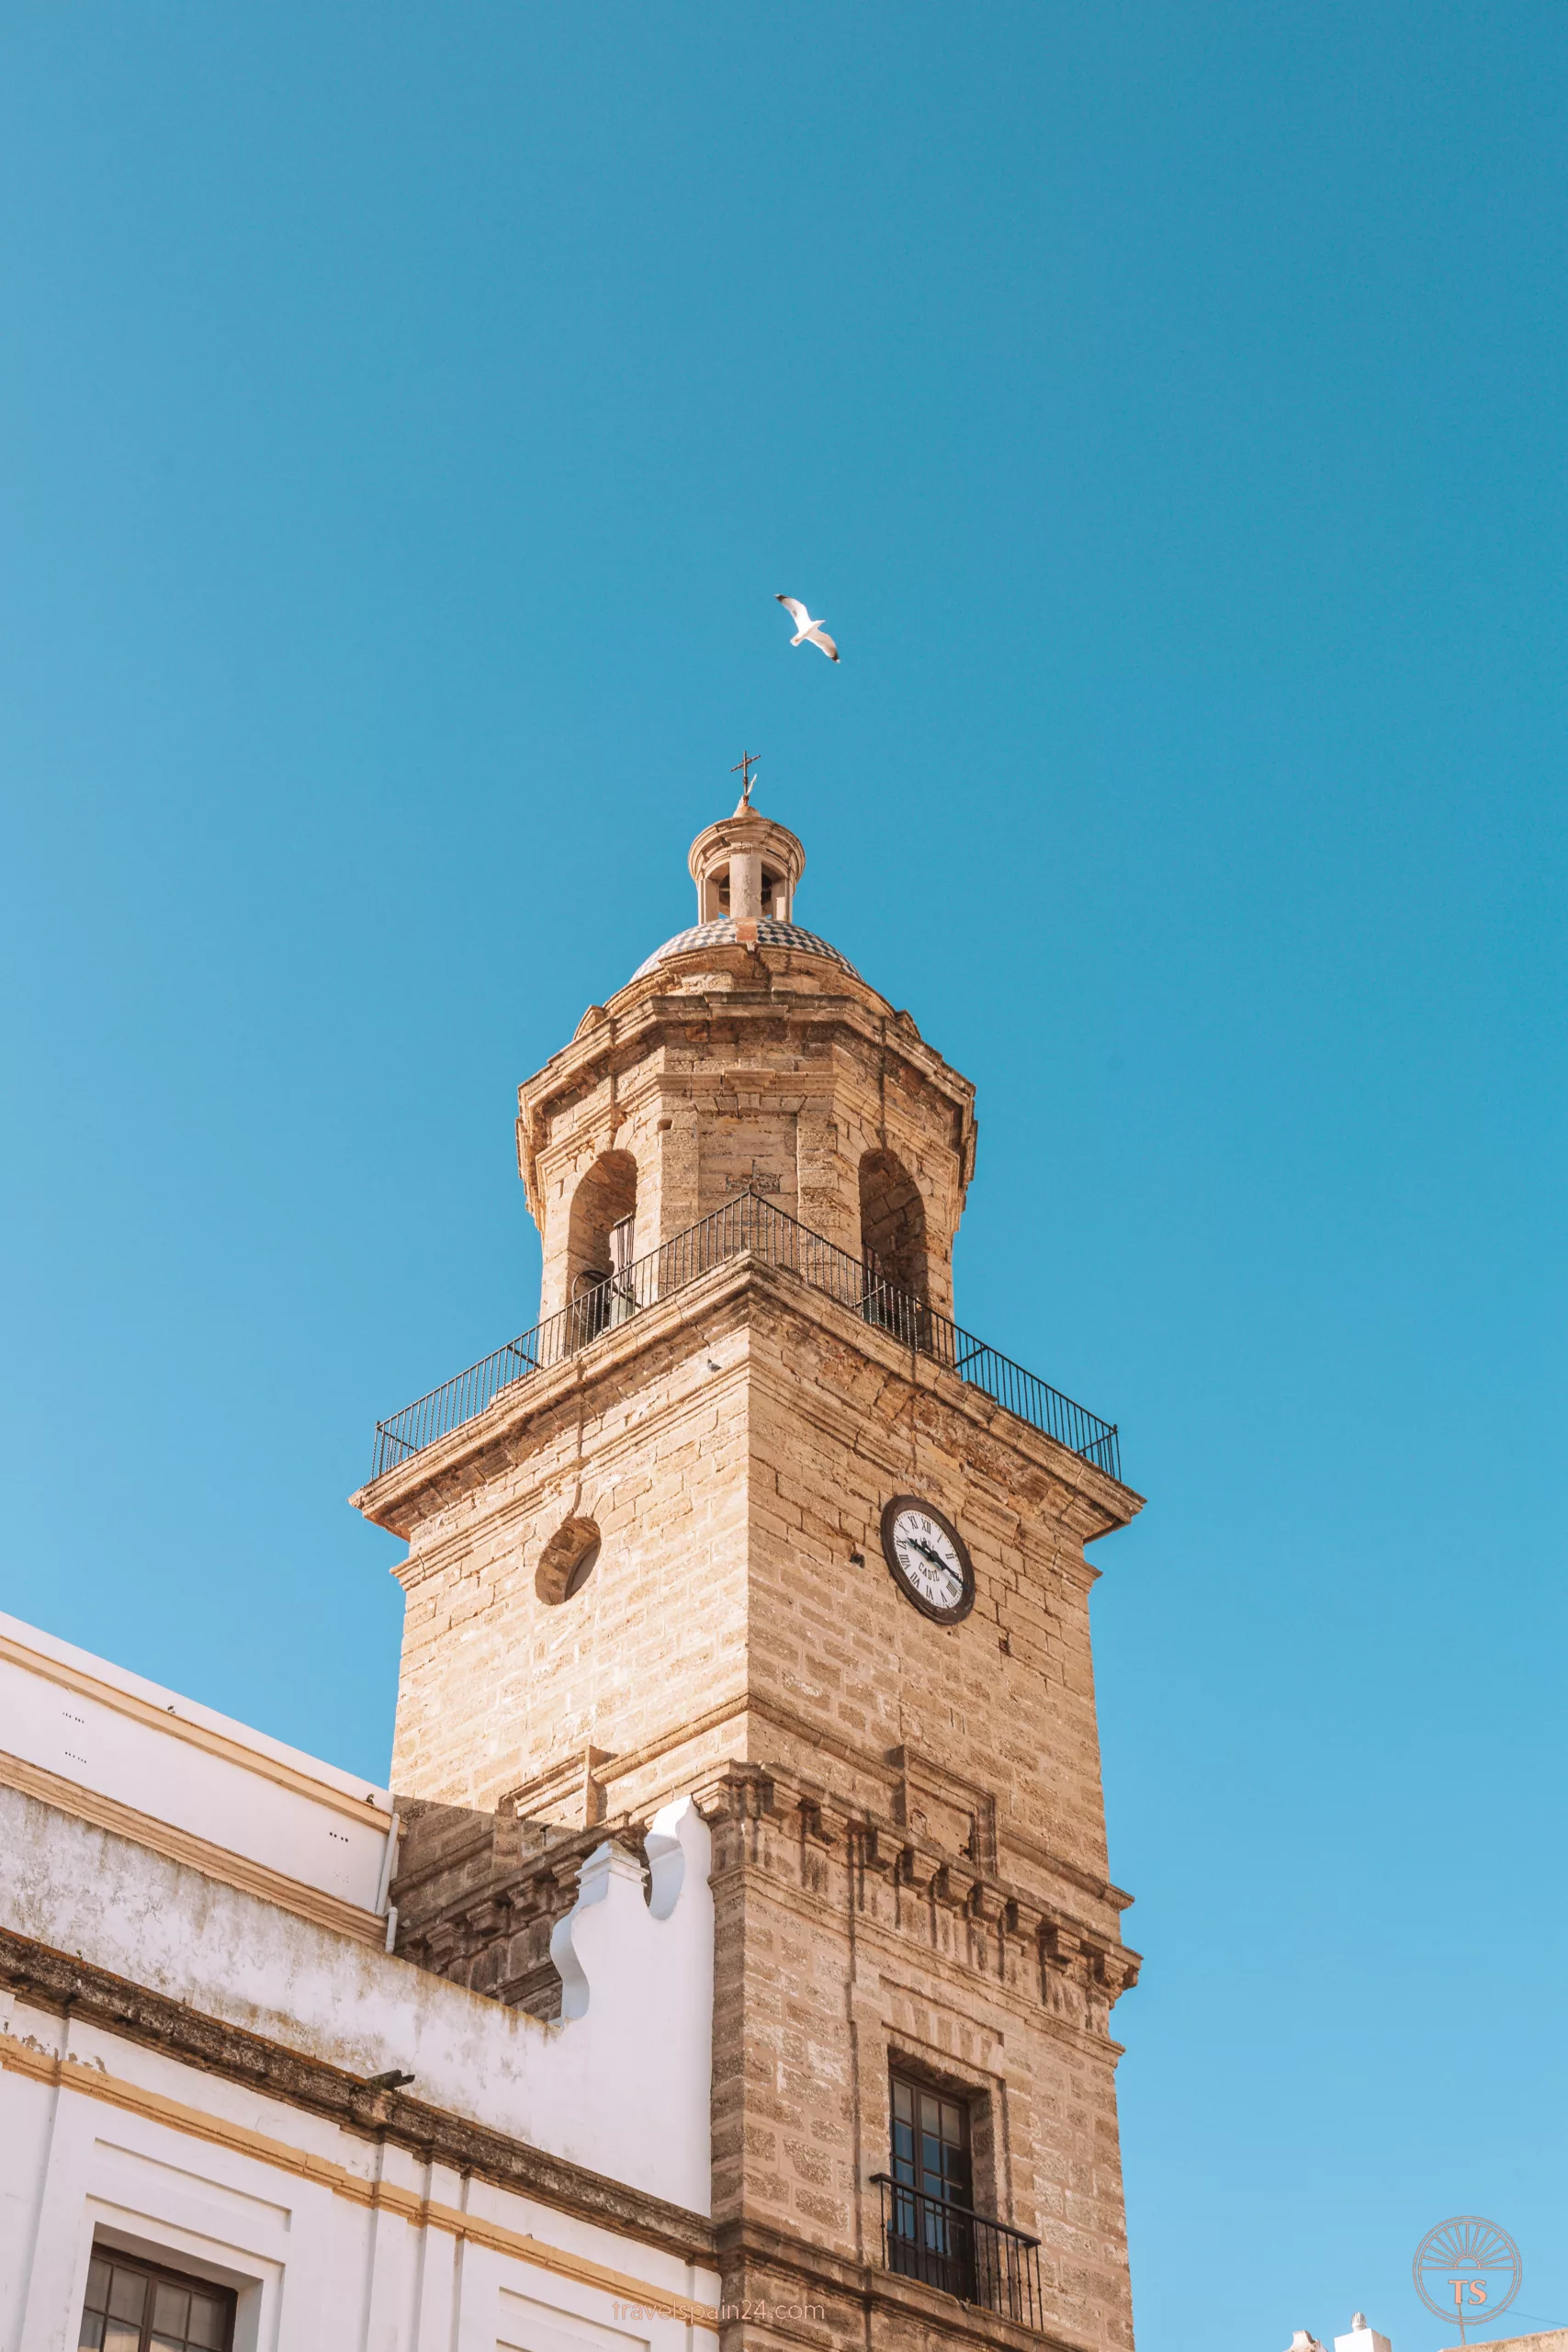 Detailed view of Iglesia Conventual de Santo Domingo (Cádiz del Rosario) on a sunny day, accompanied by a seagull in flight. This image showcases the architectural beauty of this landmark in Cadiz